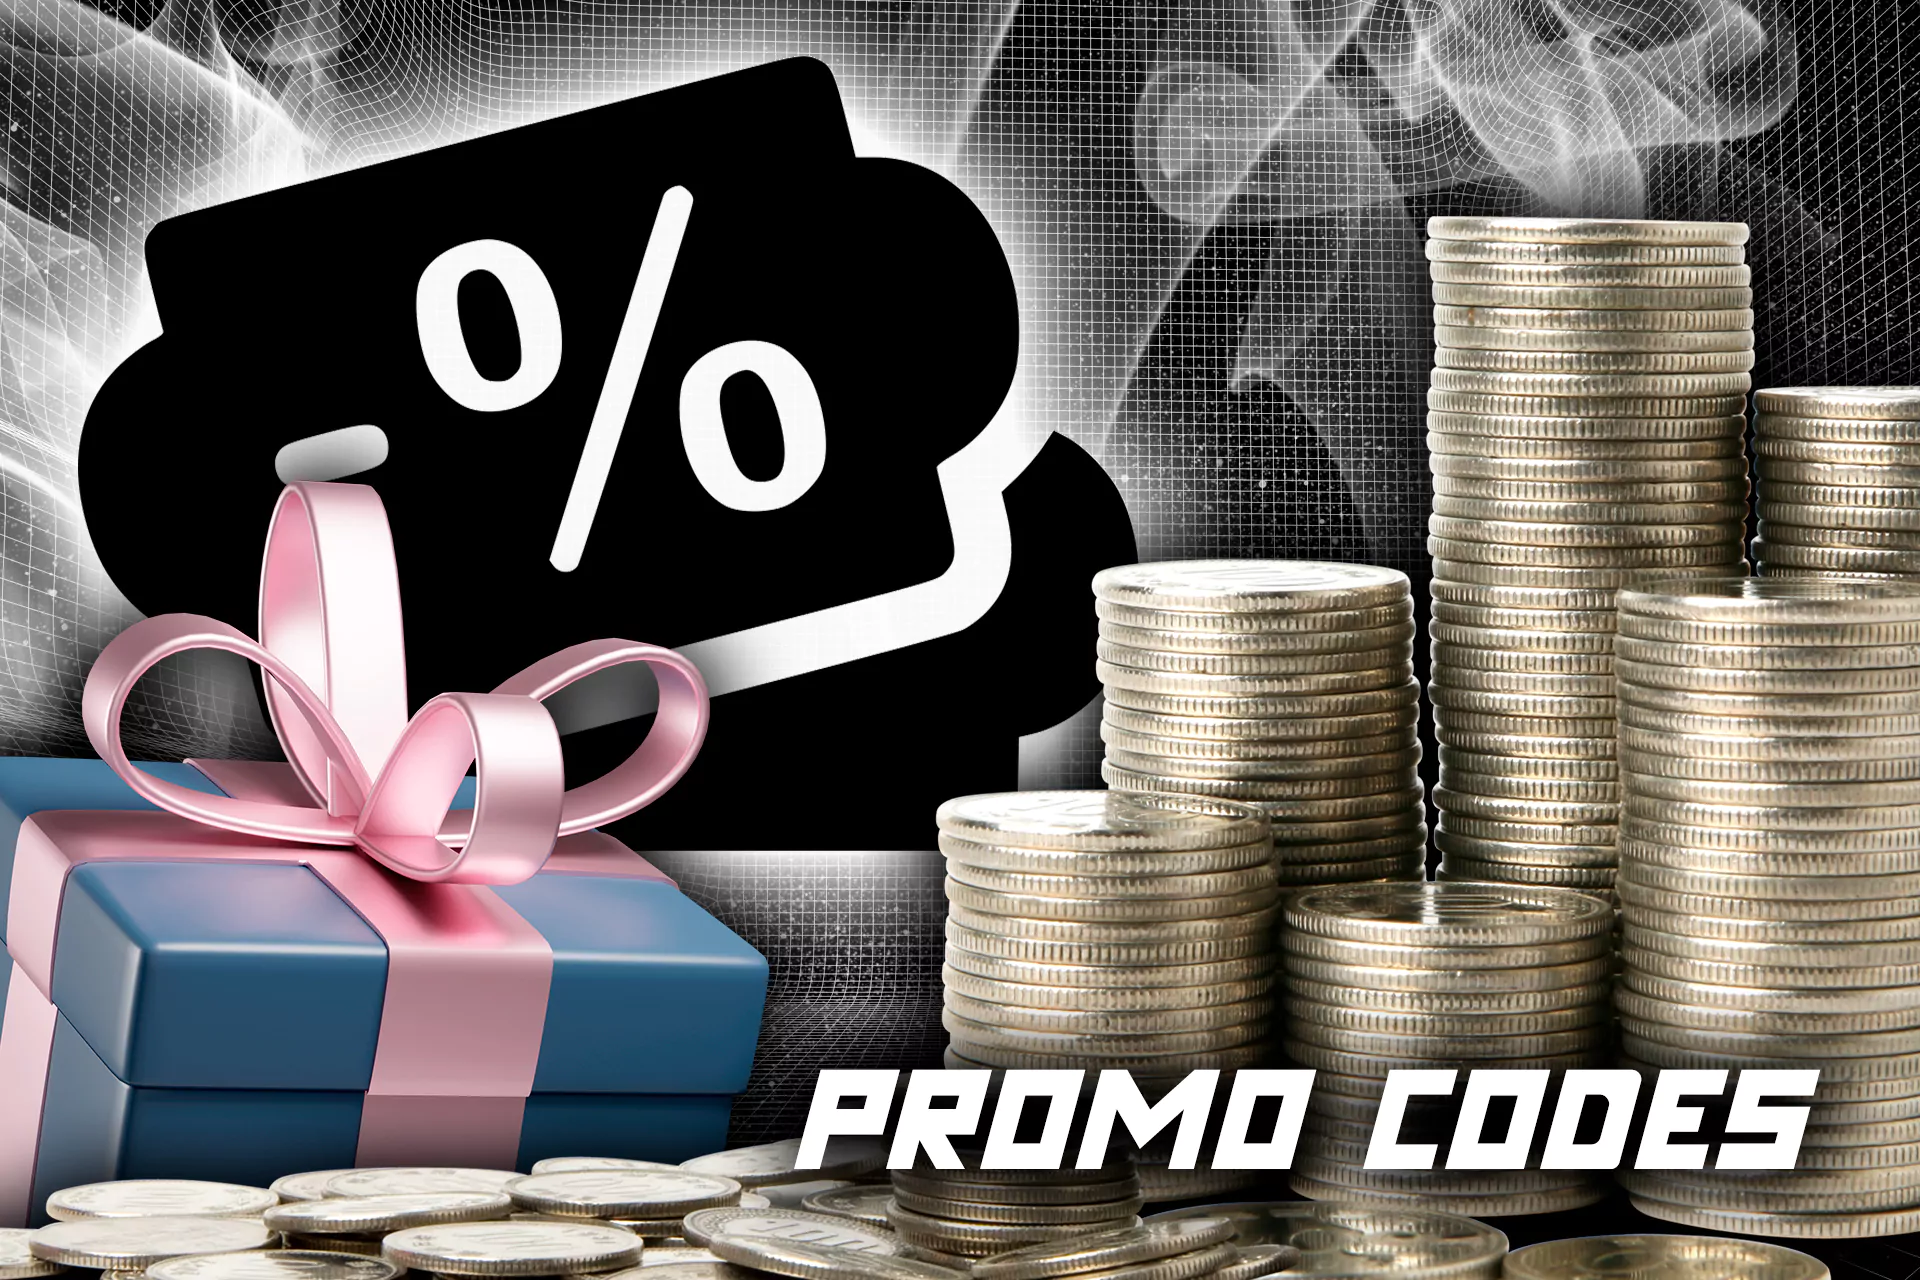 Exclusive promo codes provided to users.